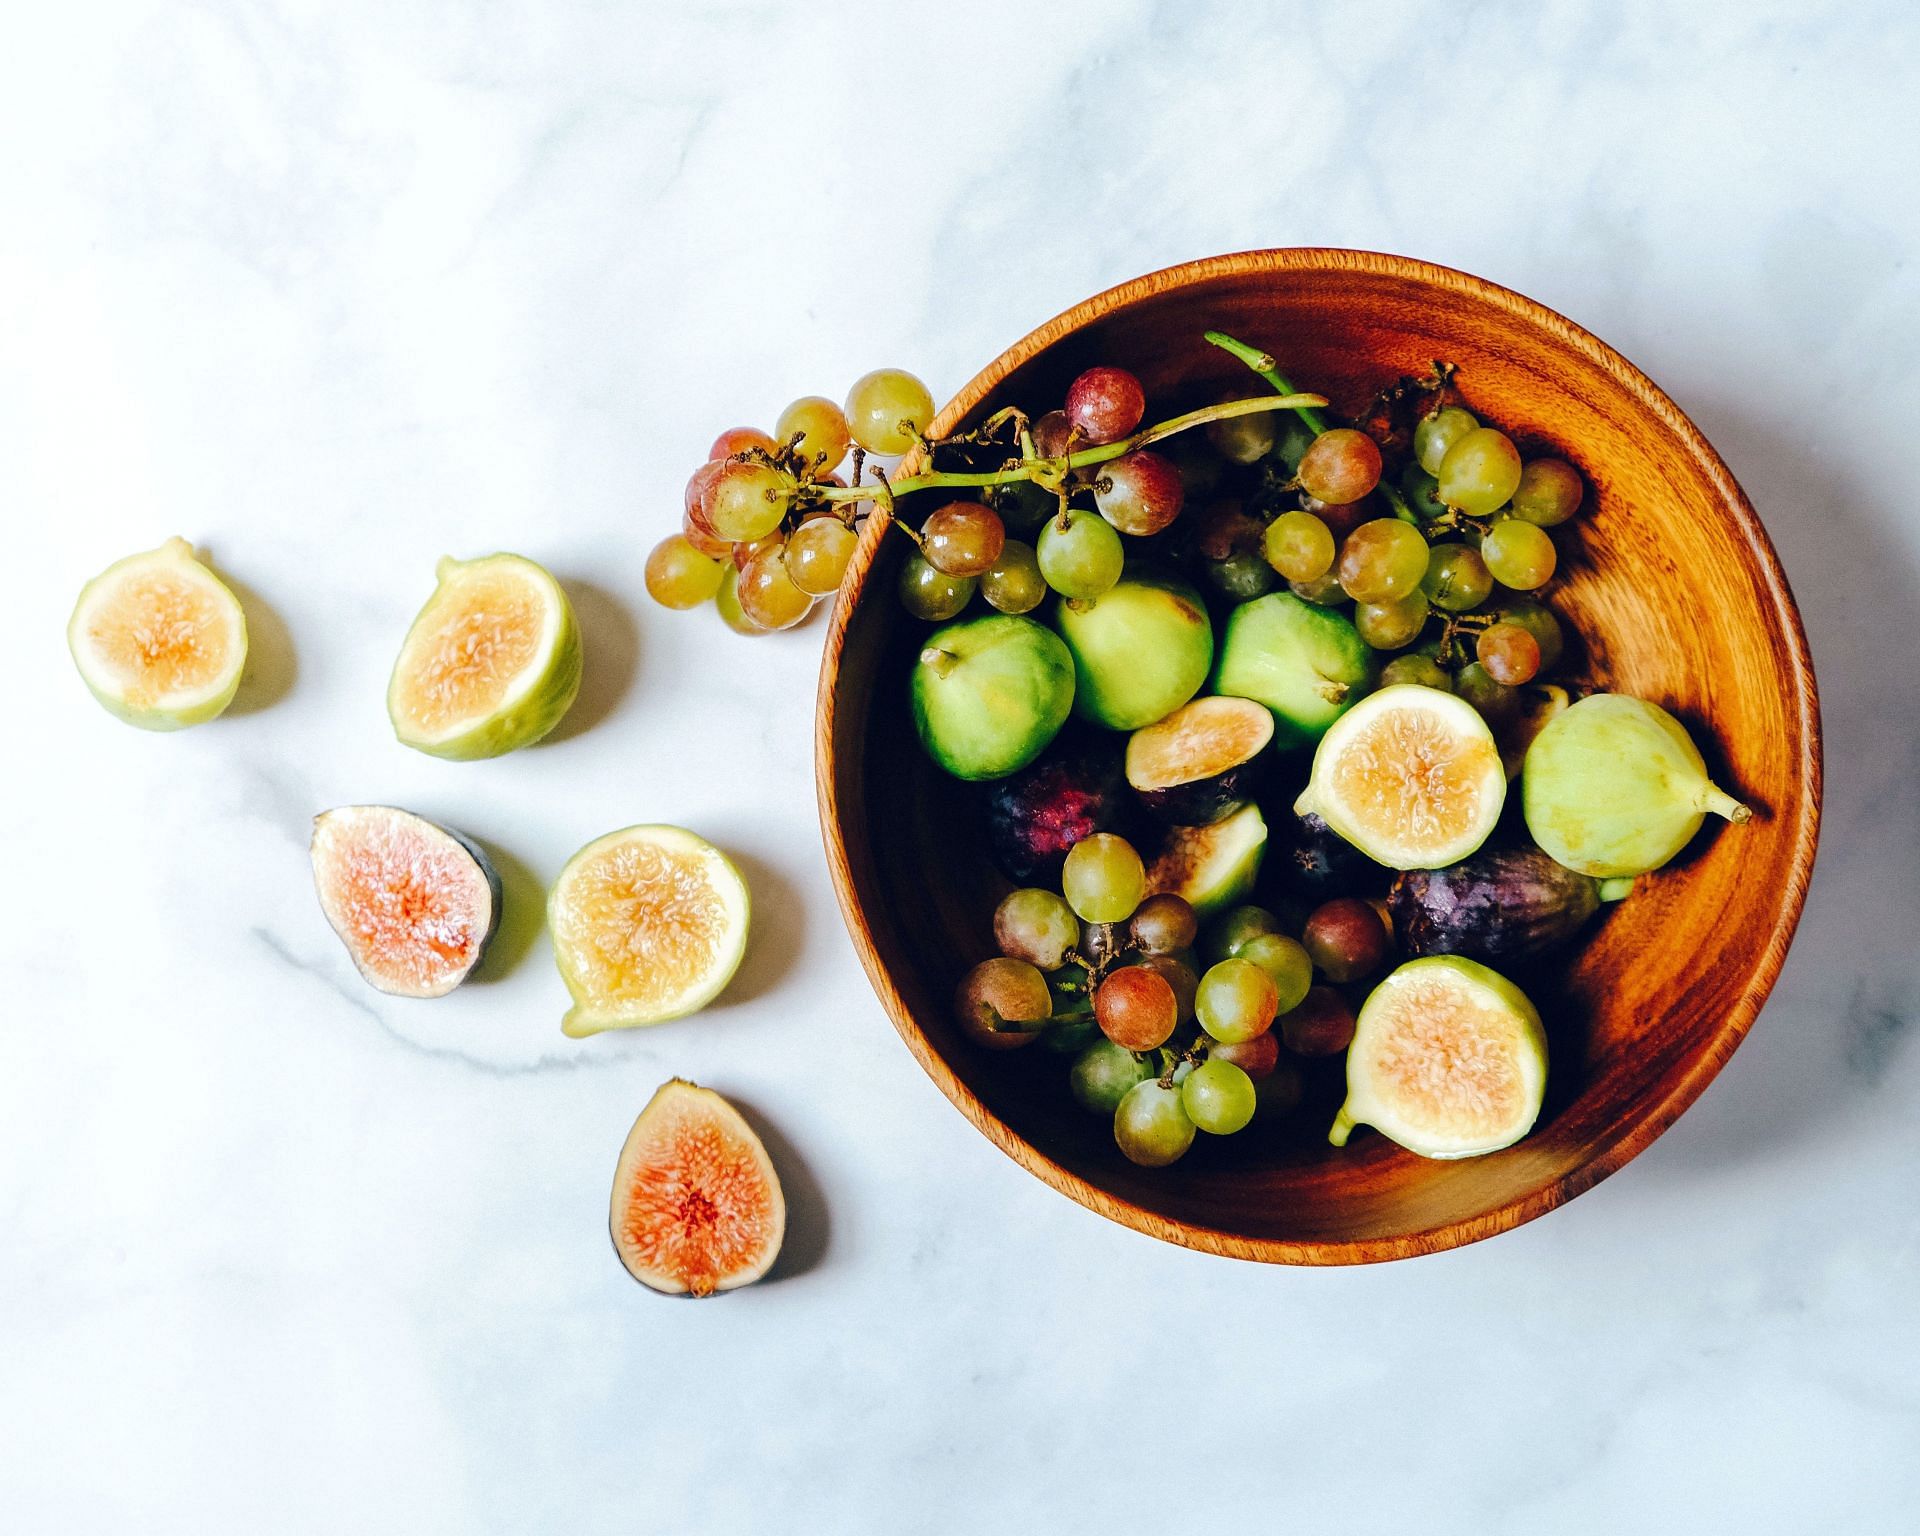 Figs are extremely beneficial for heart health and cholesterol level. (Image via Pexels/Ella Olsson)